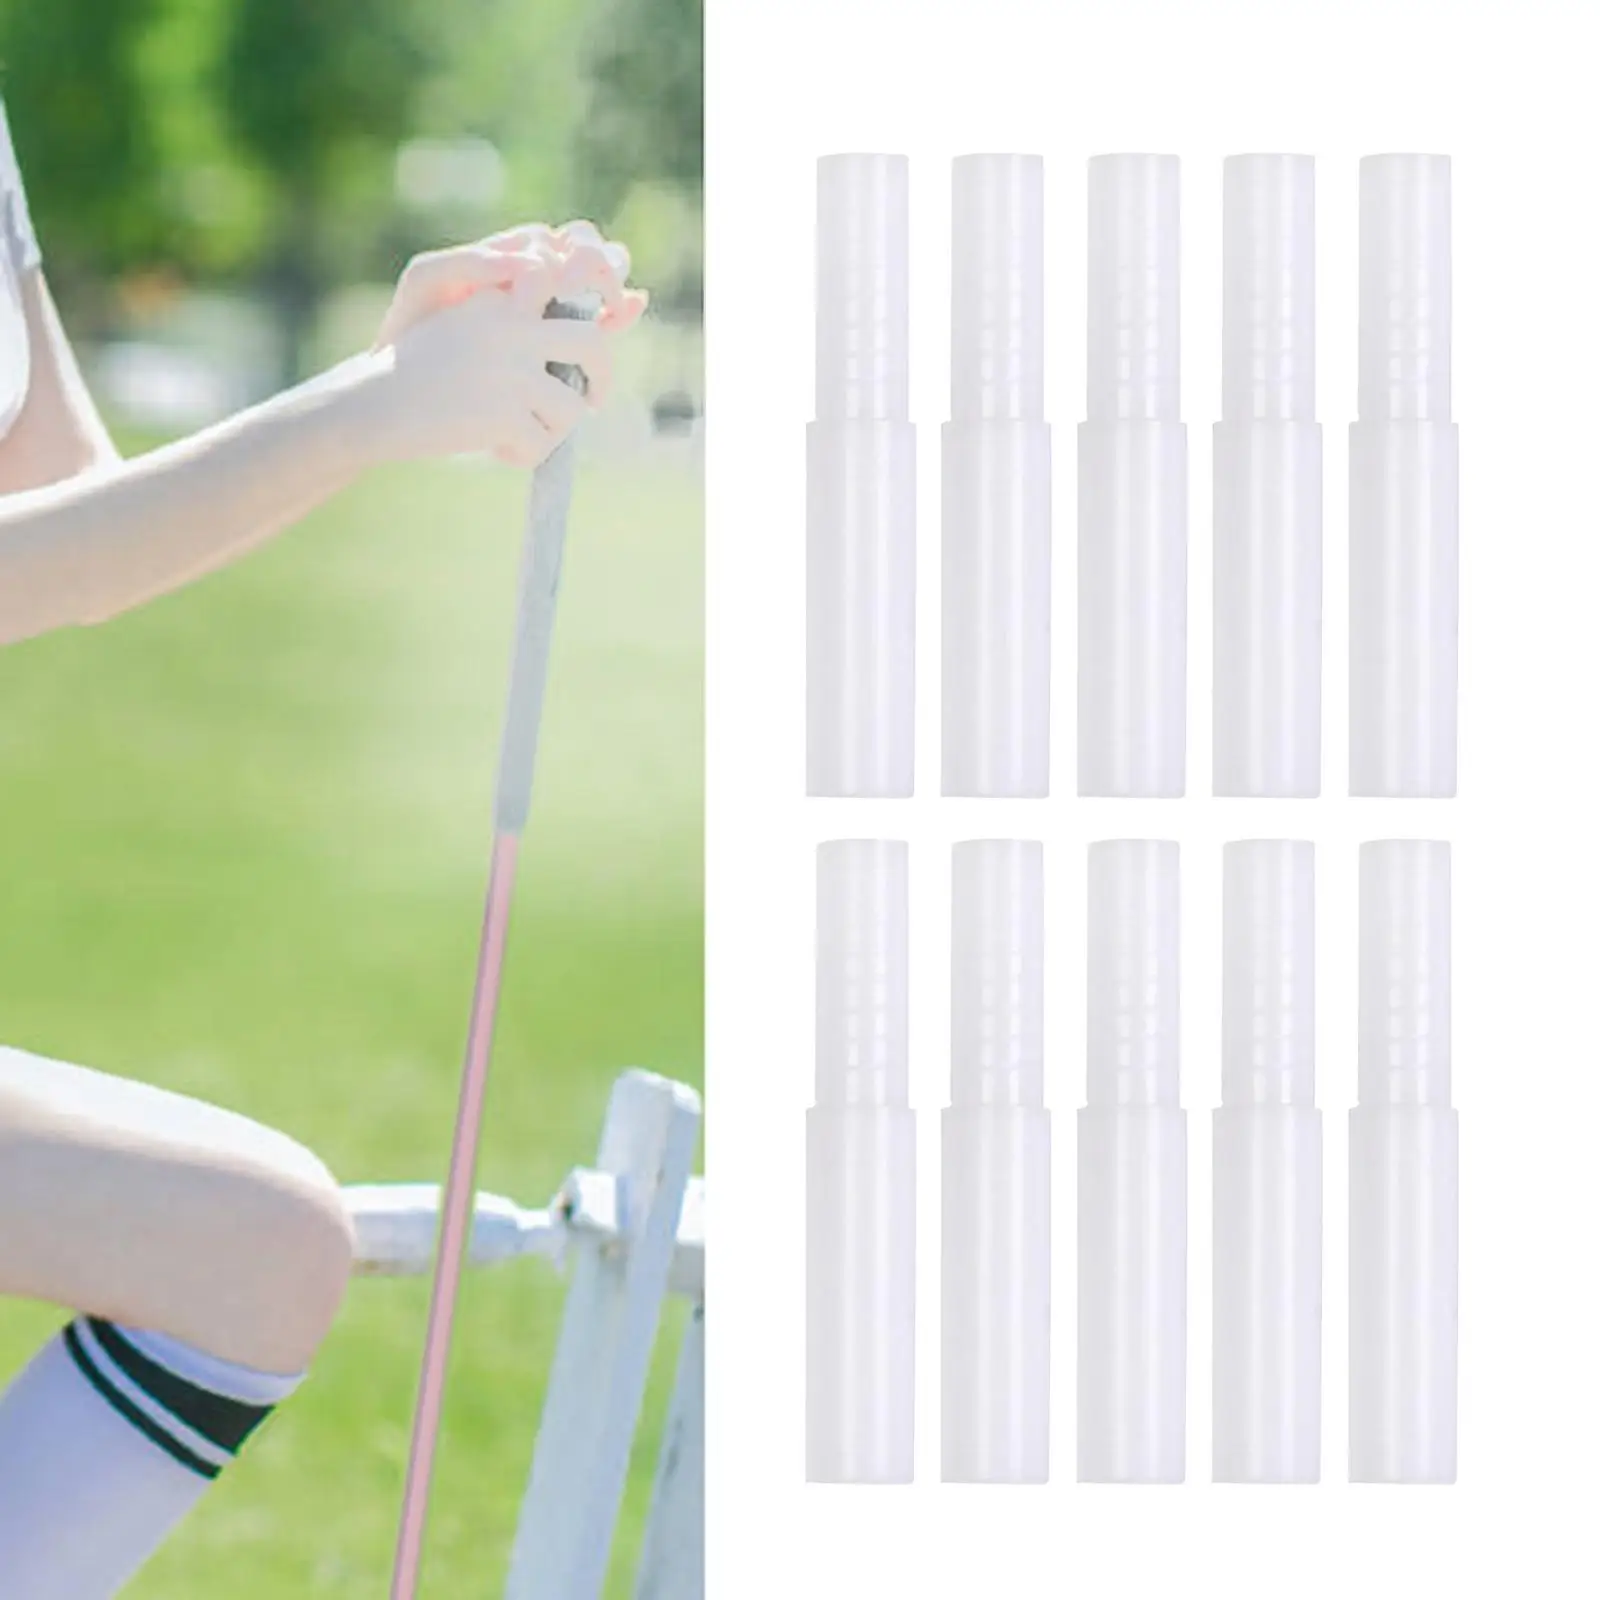  Plastic Golf Club Shafts Extension Extender for Carbon&Steel Rod Big-end Lengthened Fit Iron and Wood Shafts